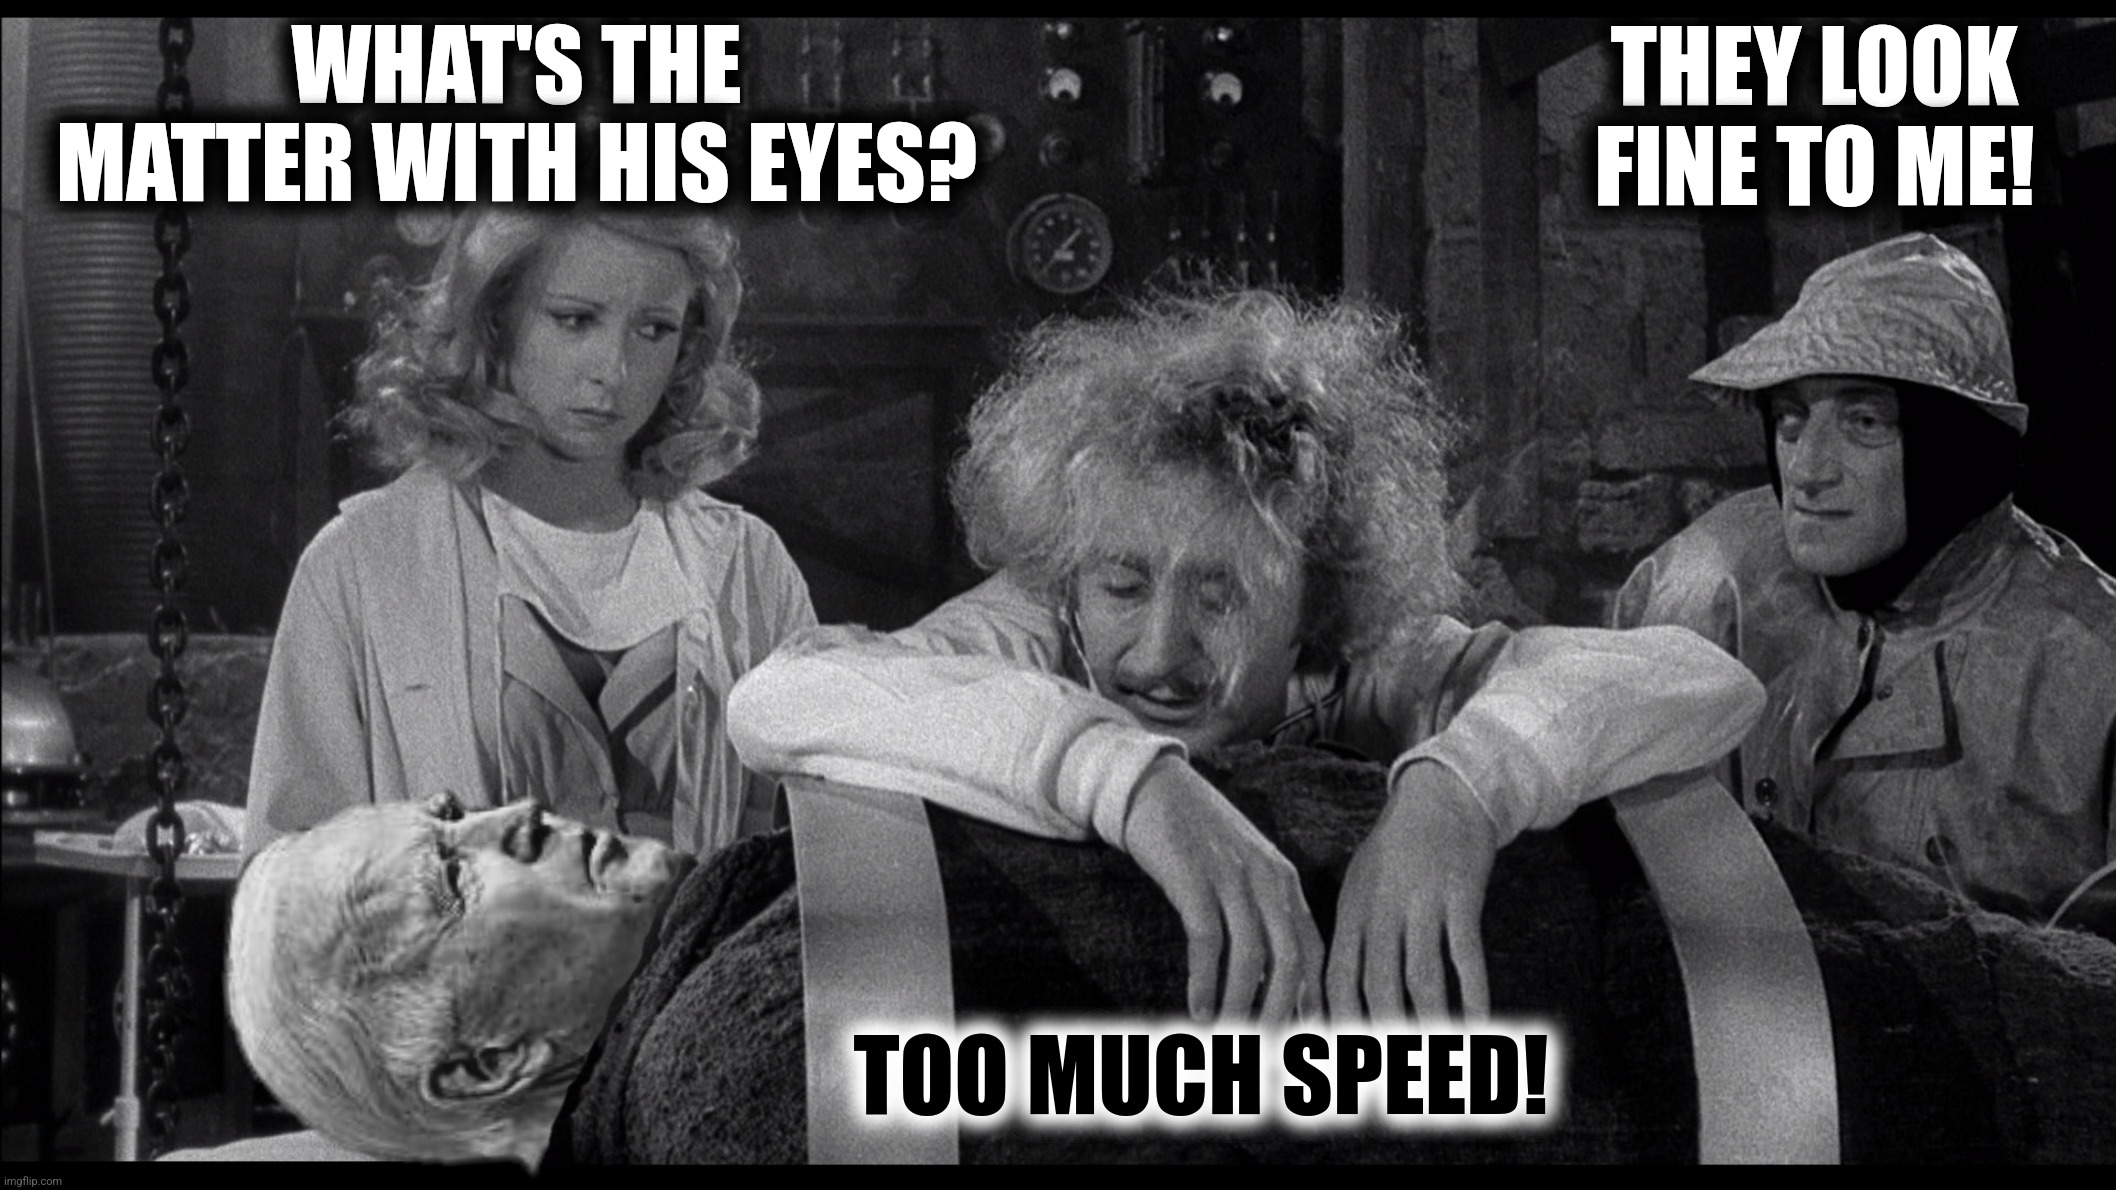 WHAT'S THE MATTER WITH HIS EYES? TOO MUCH SPEED! THEY LOOK FINE TO ME! | made w/ Imgflip meme maker